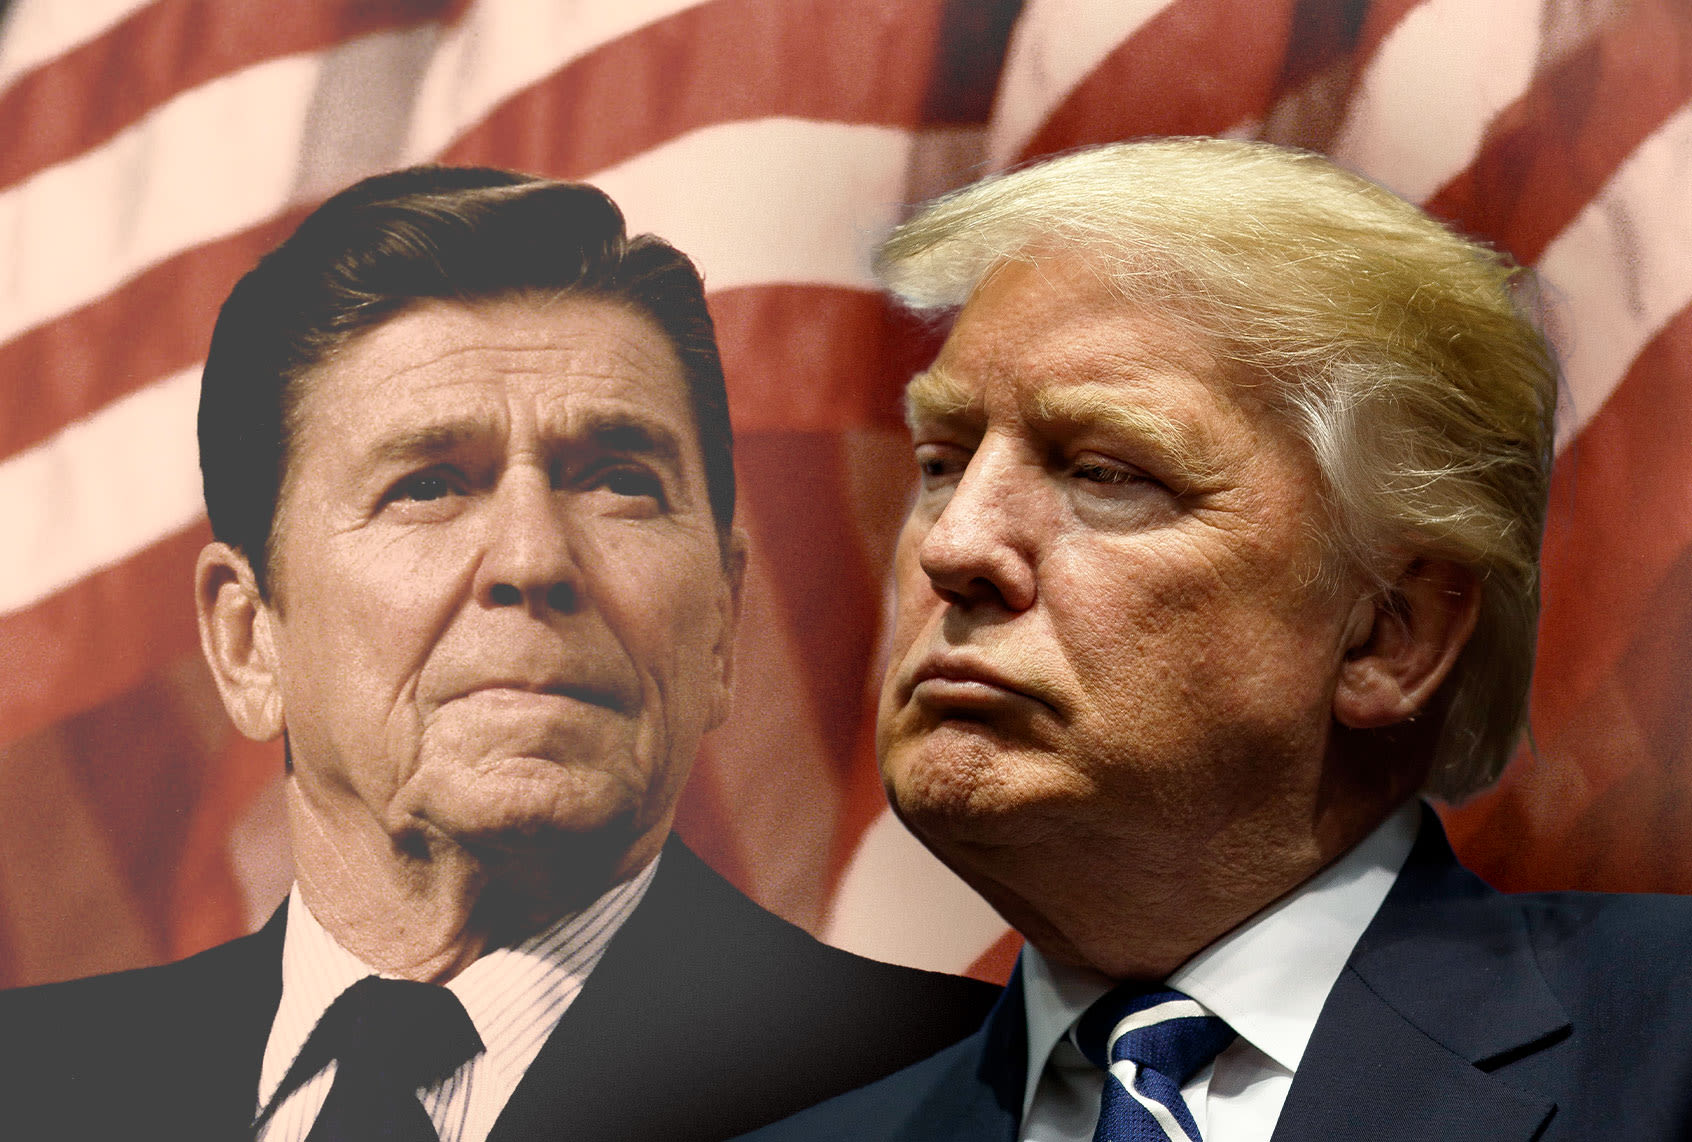 America is still haunted by the ghost of Ronald Reagan's corruption